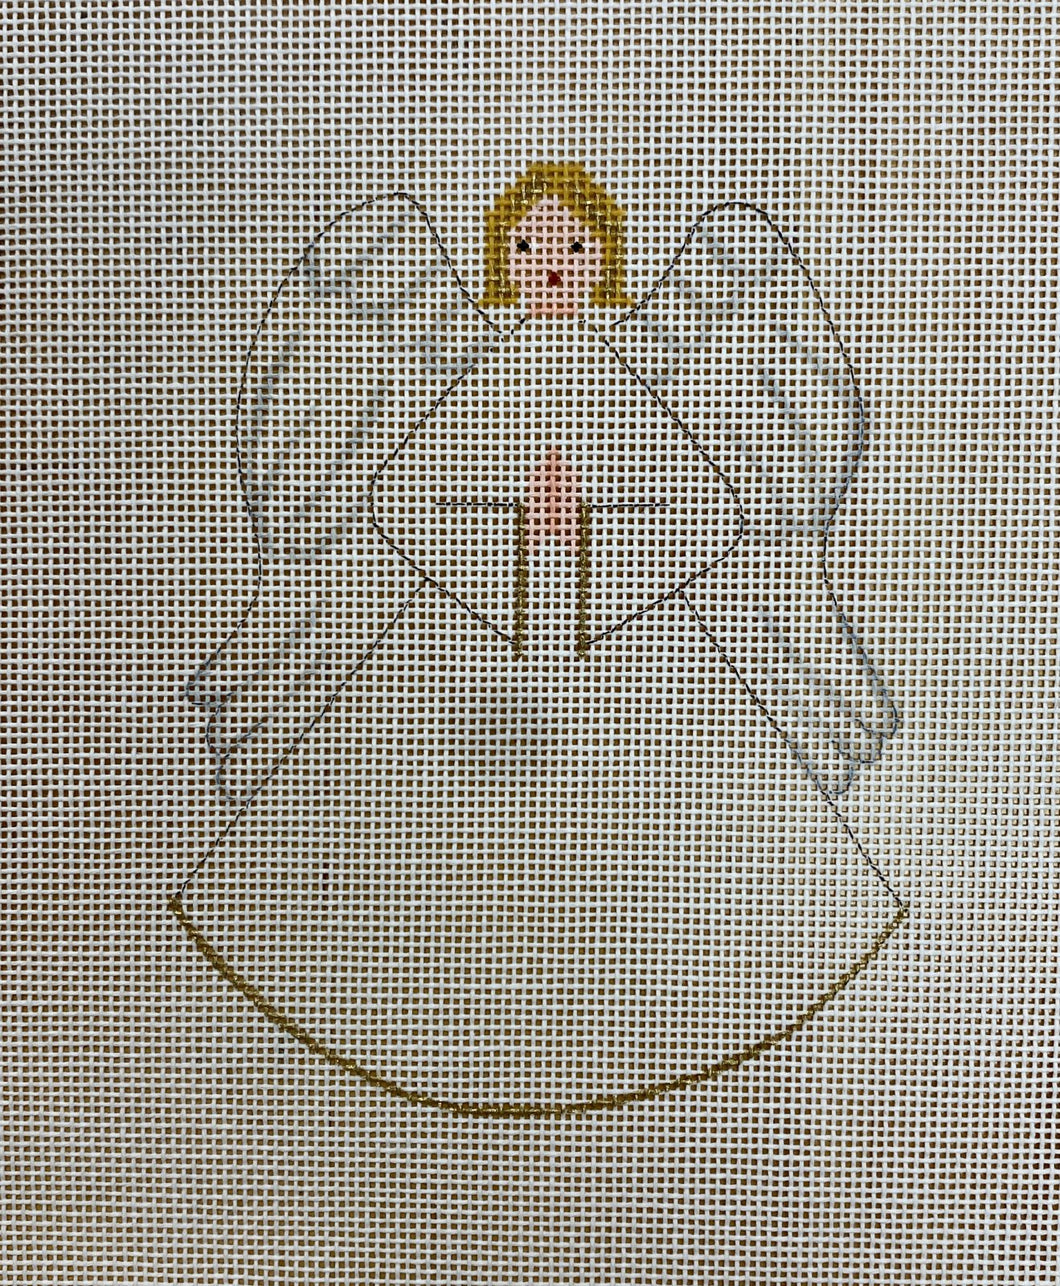 company of angels, praying with stitch guide